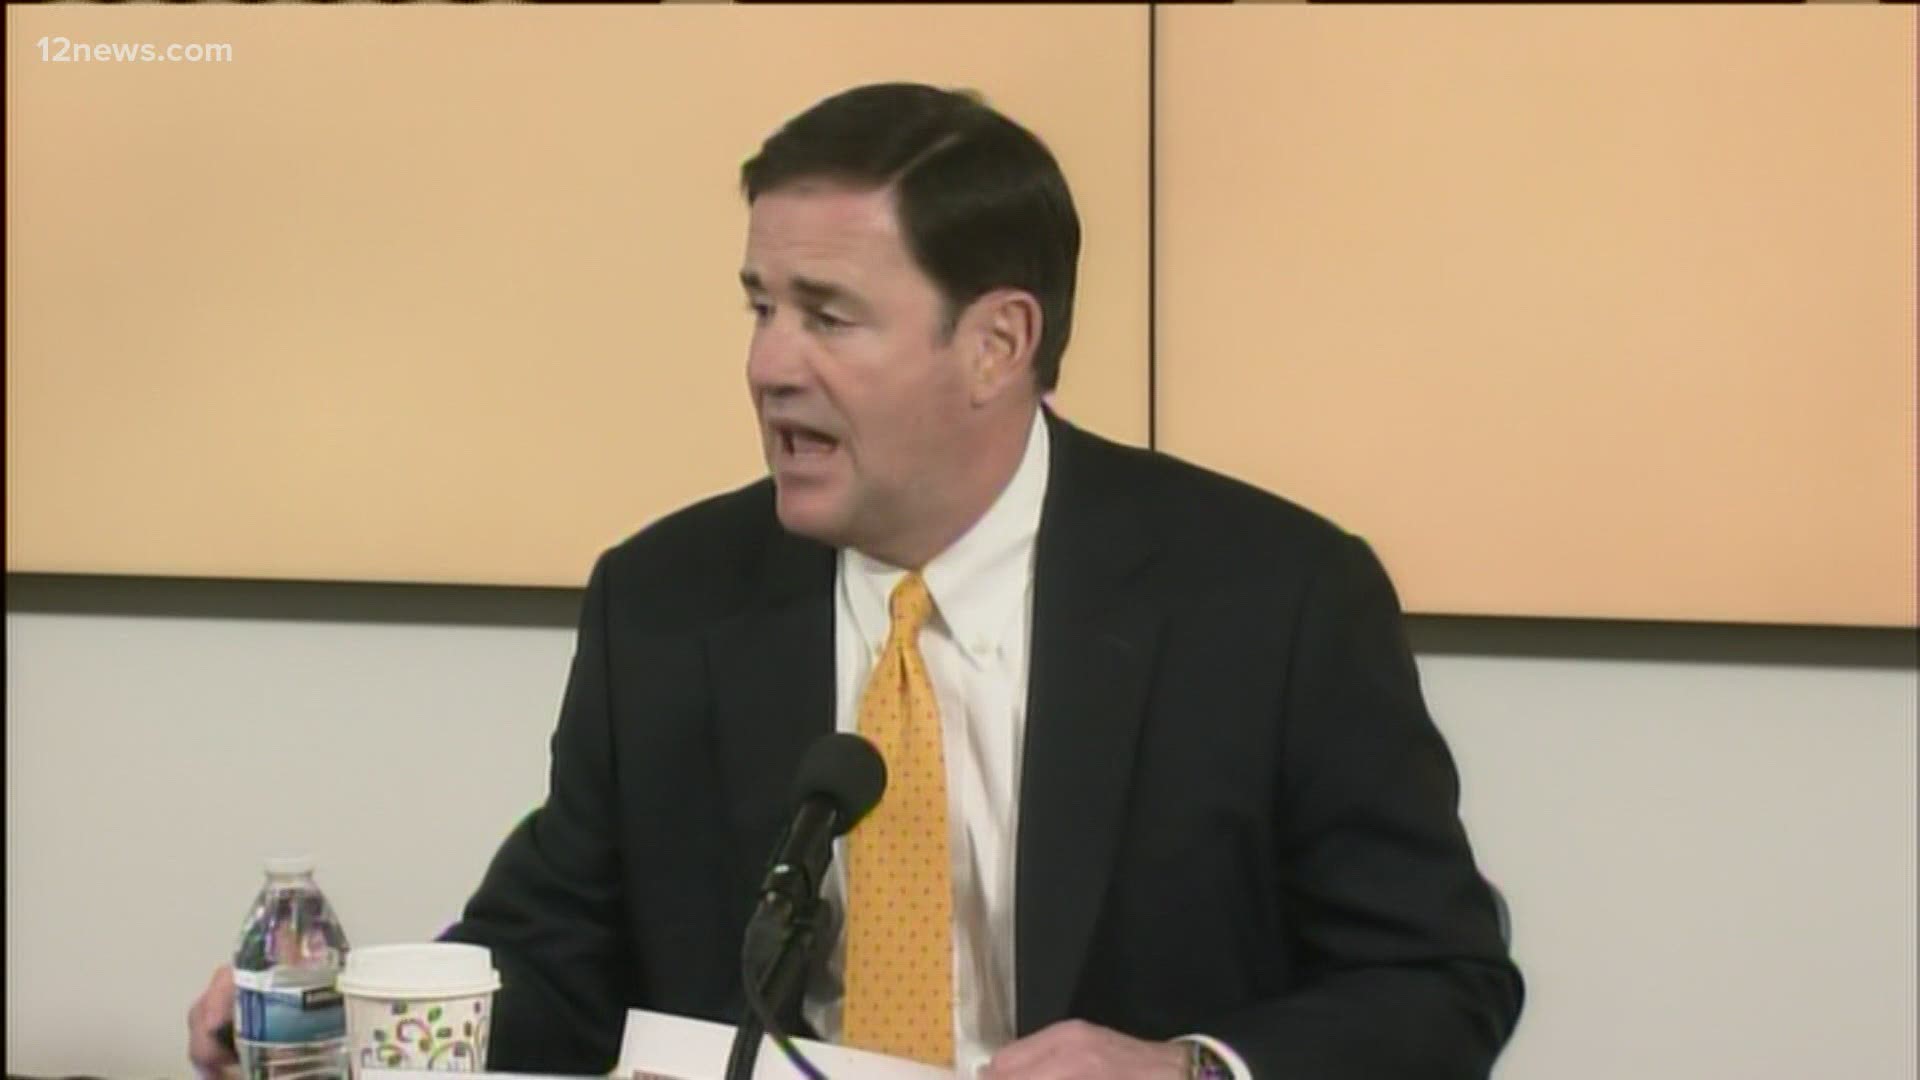 Gov. Ducey was solemn at a press conference about COVID-19 surges in Arizona on Thursday. He said the state is on pause, but didn't issue orders pausing anything.